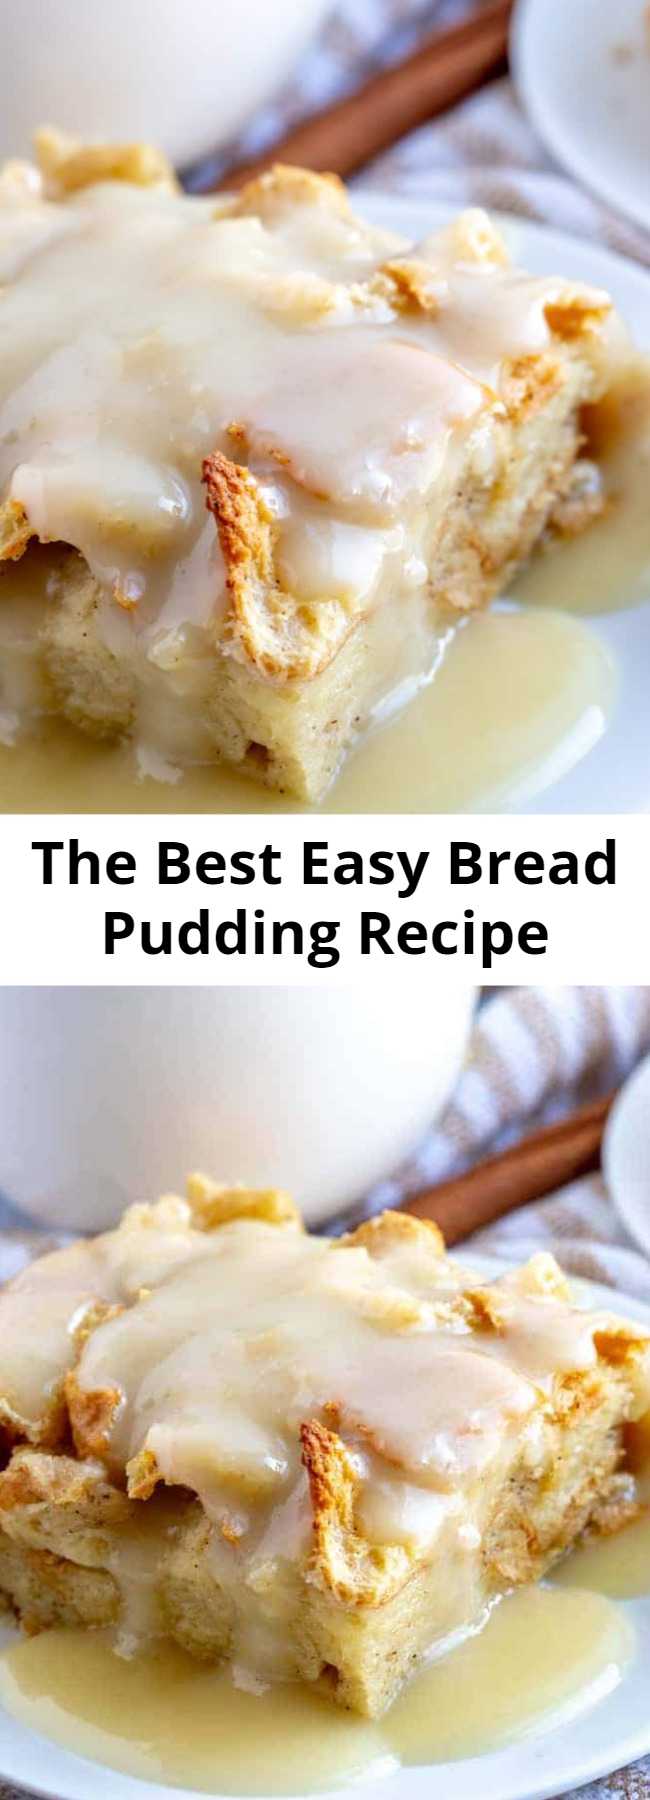 The Best Easy Bread Pudding Recipe - When it comes to easy recipes this Bread Pudding couldn't get any simpler. Filled with cinnamon and nutmeg this makes the perfect breakfast or dessert recipe.